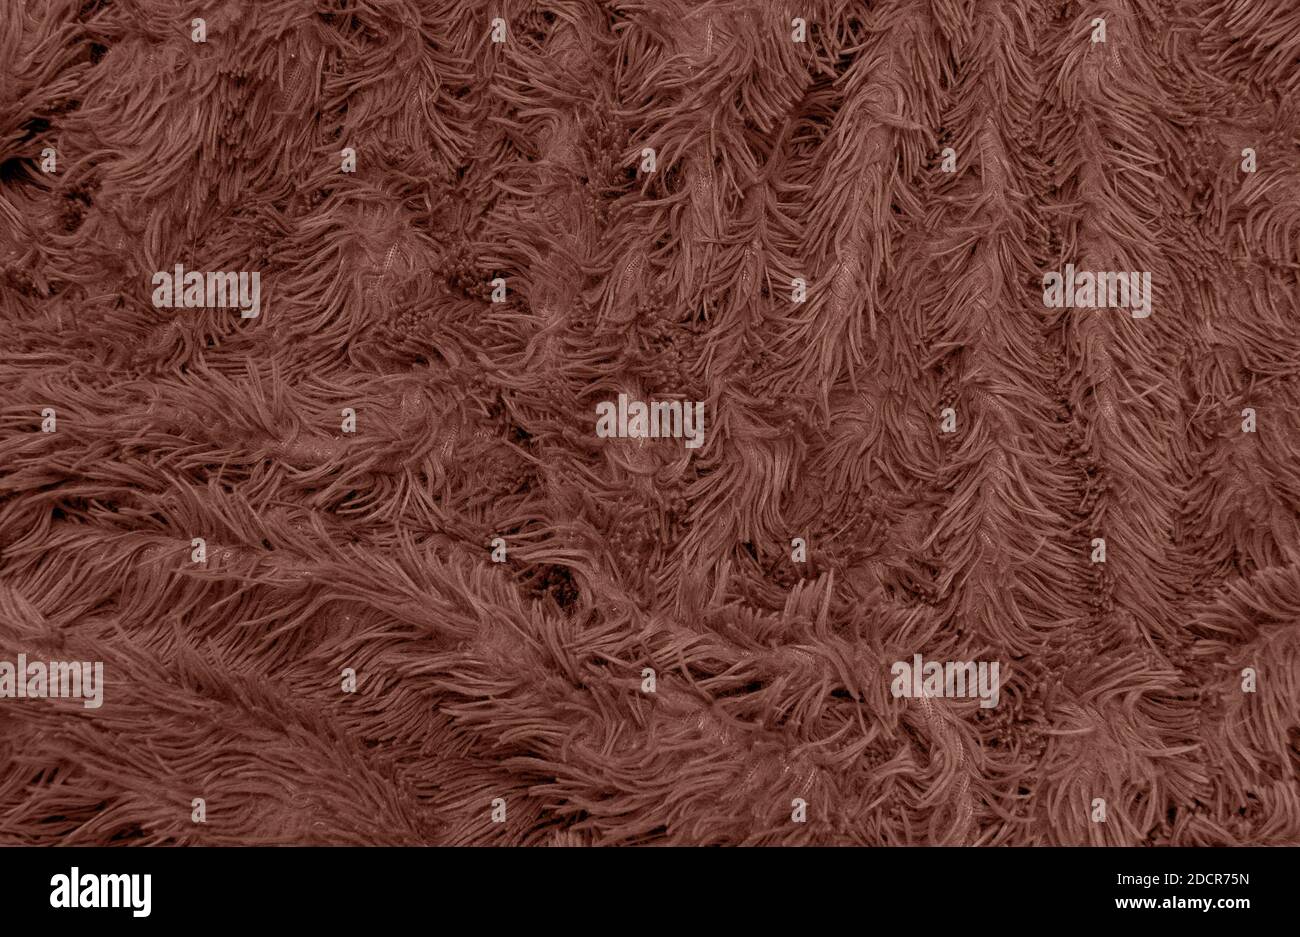 abstract background of detail bright pattern texture shaggy fur with long fibers. Polyester synthetic or natural fluffy plaid. Comfortable home textil Stock Photo